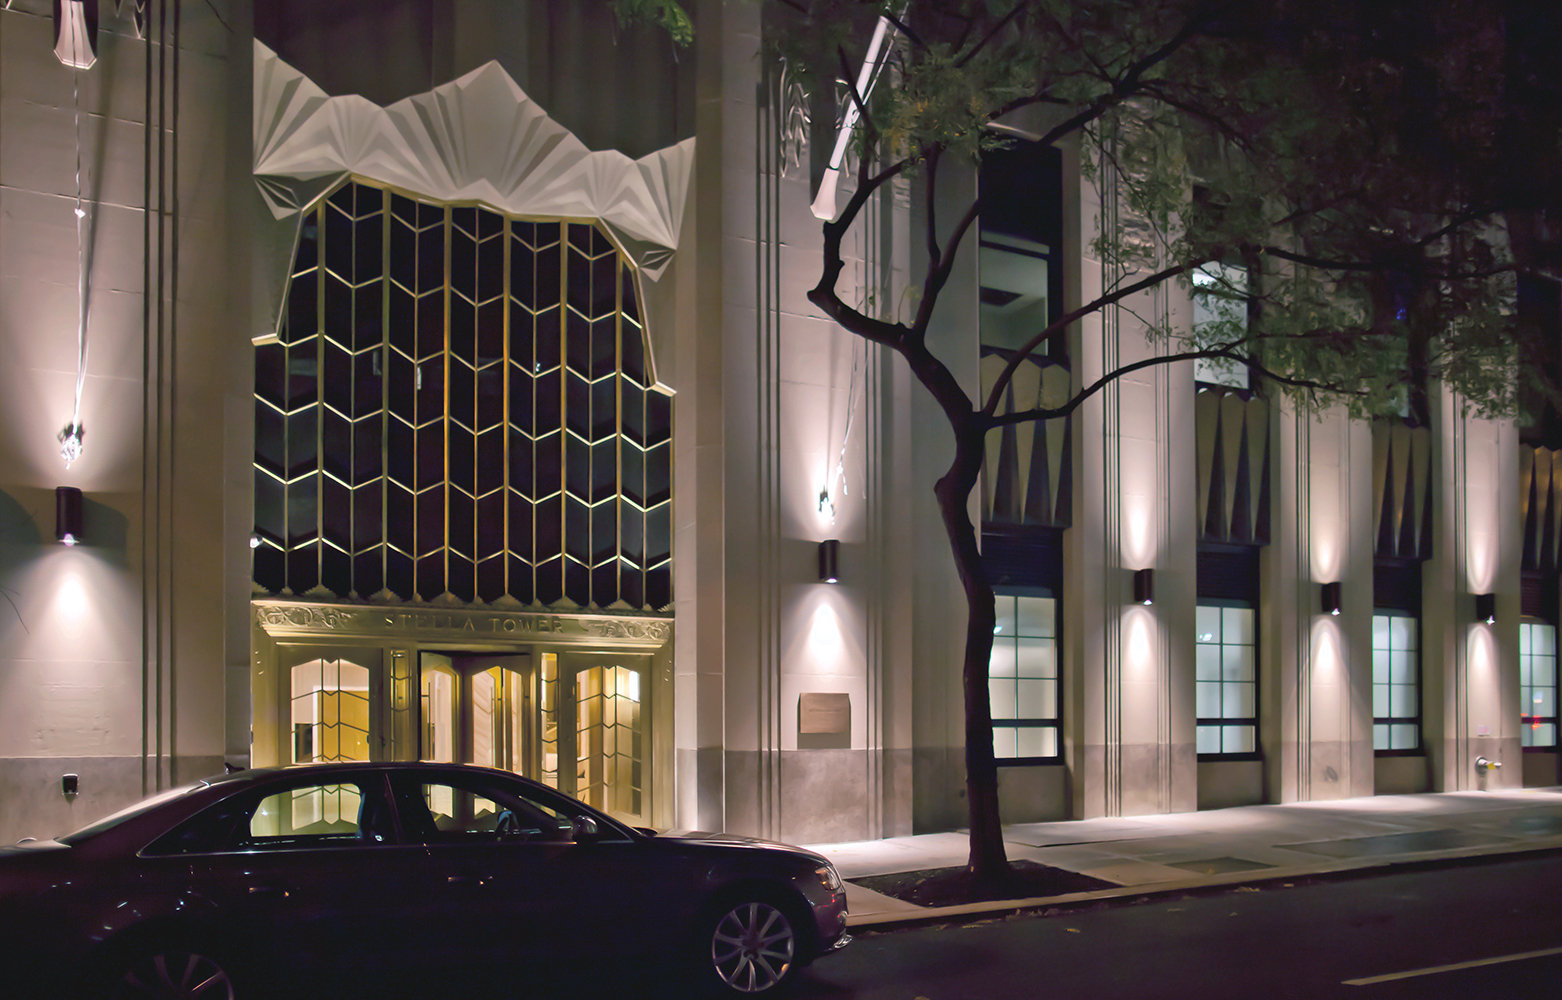 Pla exterior lighting fixtures provide uplight and downlight on a commercial building exterior at night.